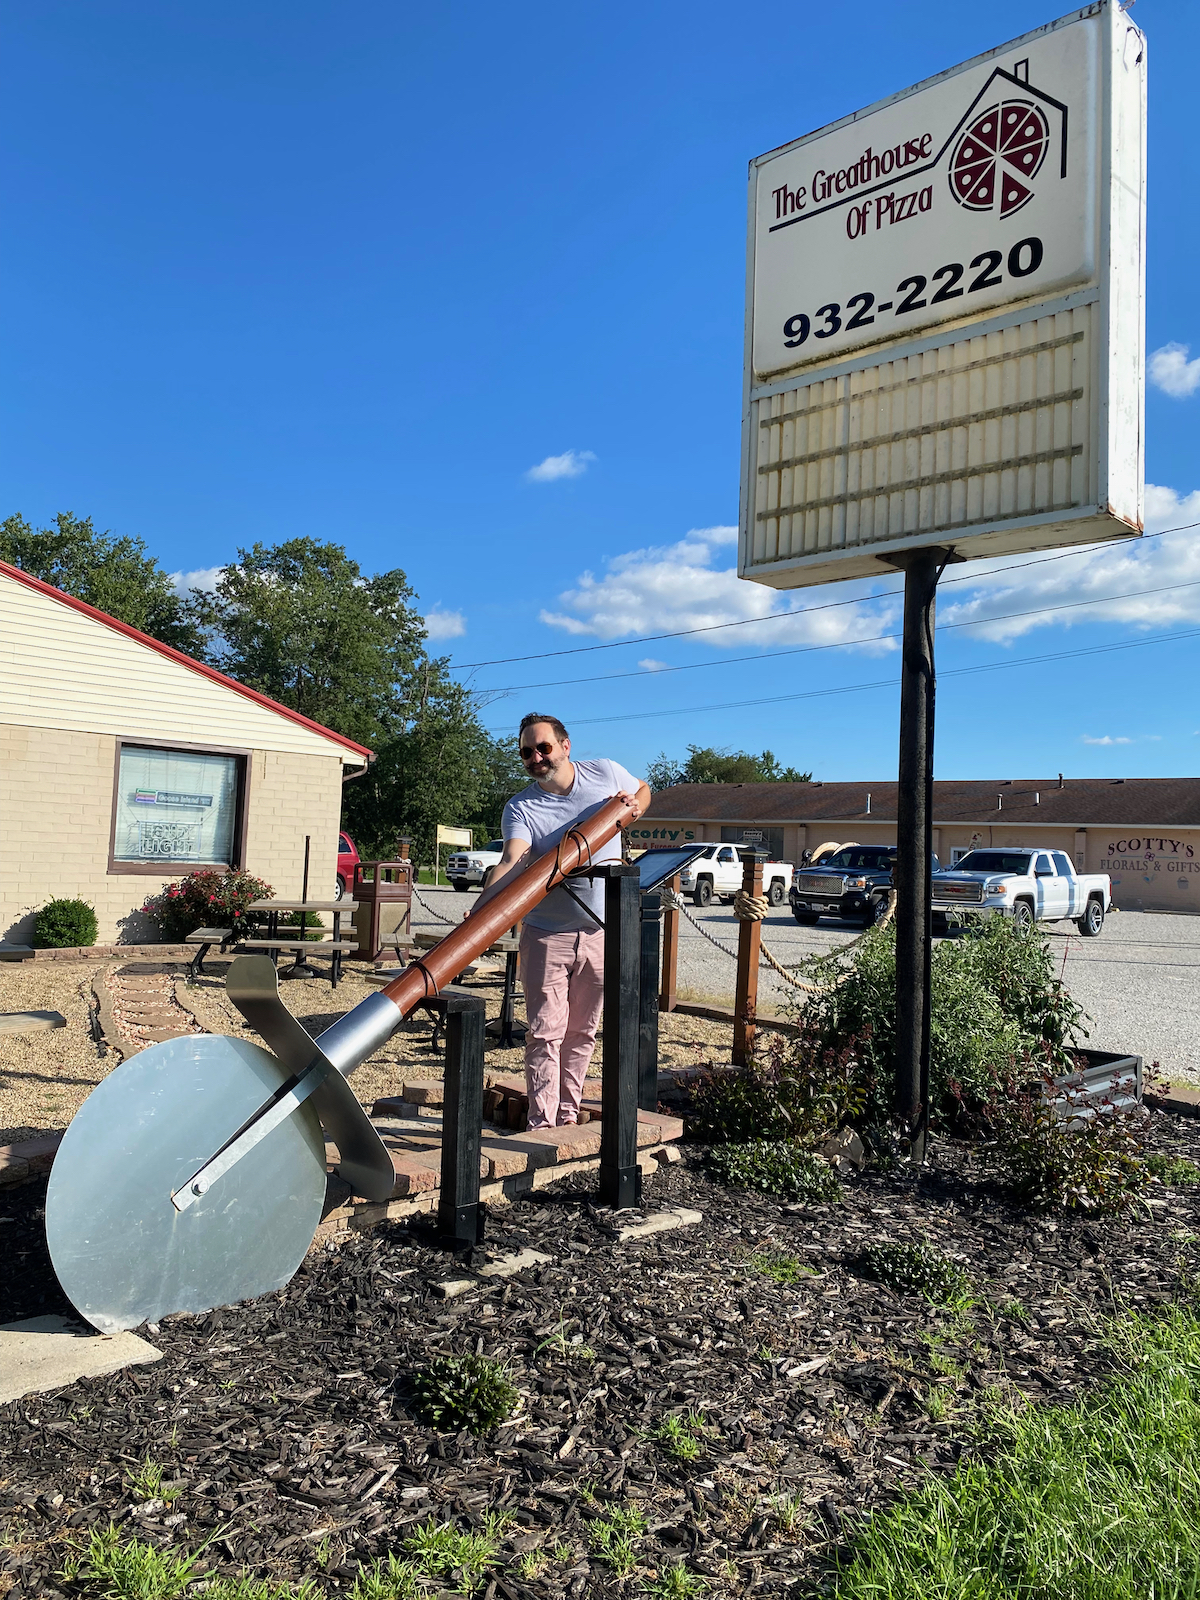 Man holding Big Pizza Slicer outside of the Greathouse of Pizza in Casey, Illinois